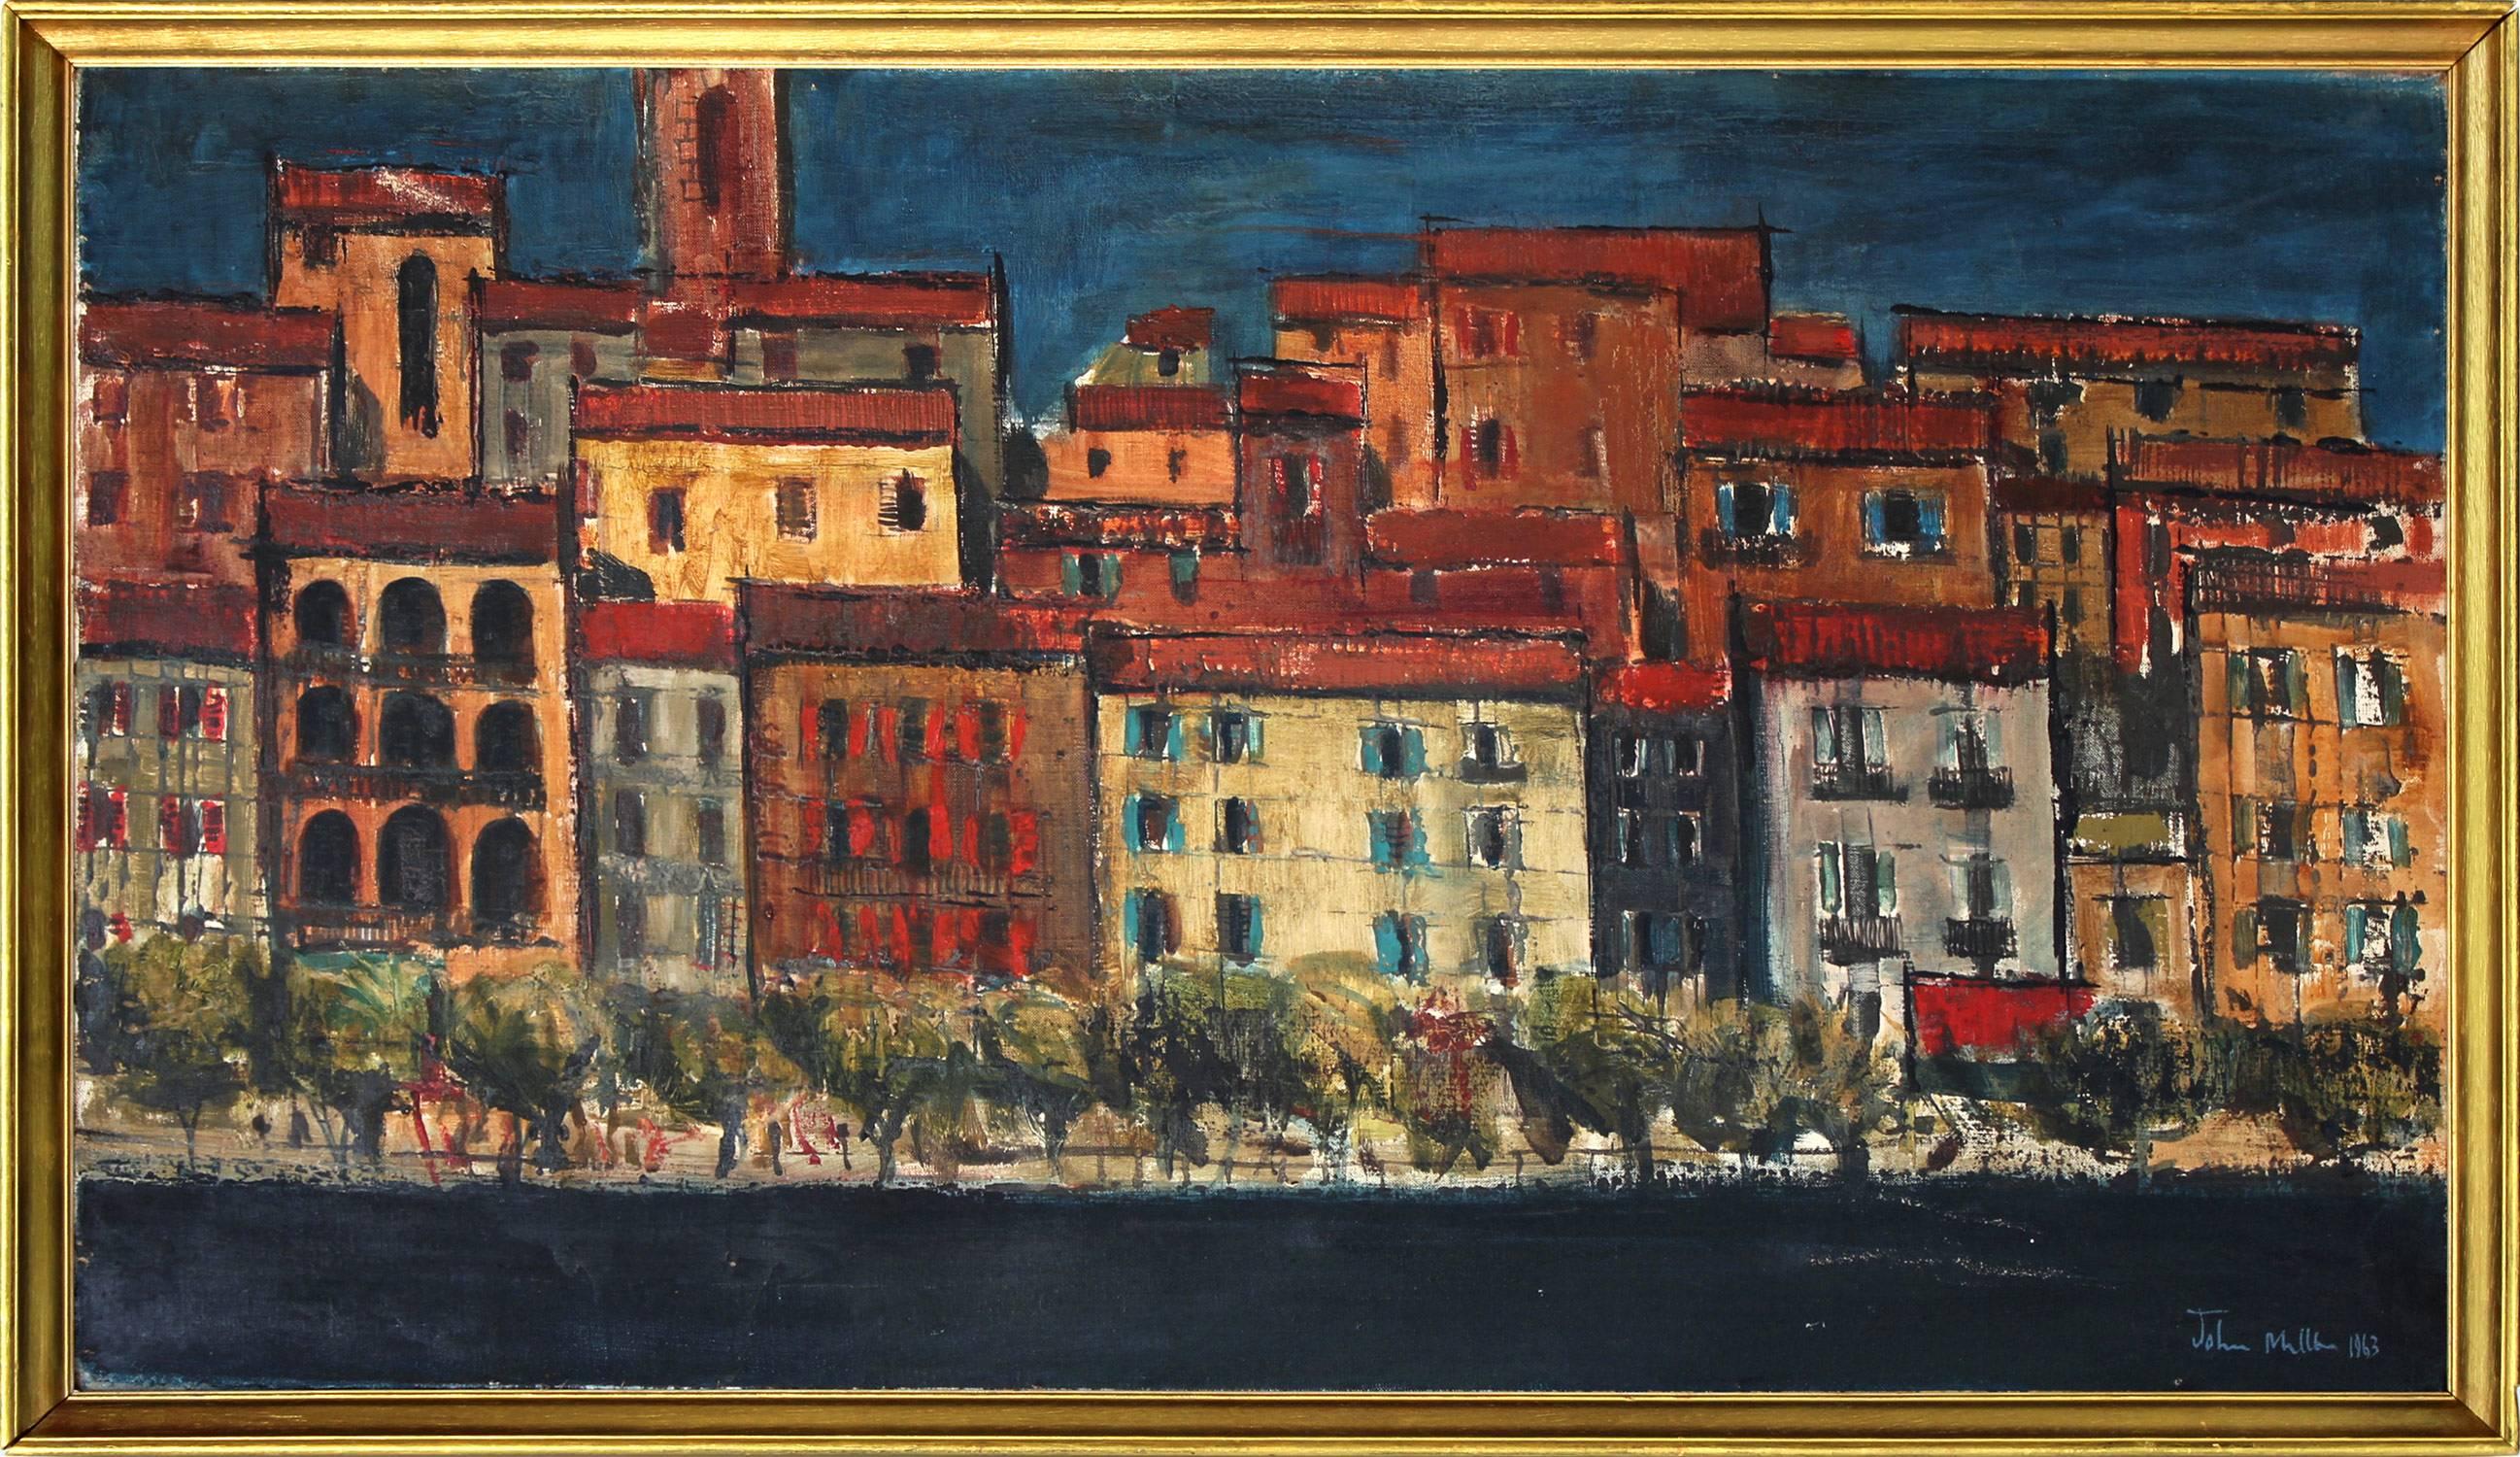 "Porto Santo Stefano" Mid Century Abstract Painting on Canvas of a Village View